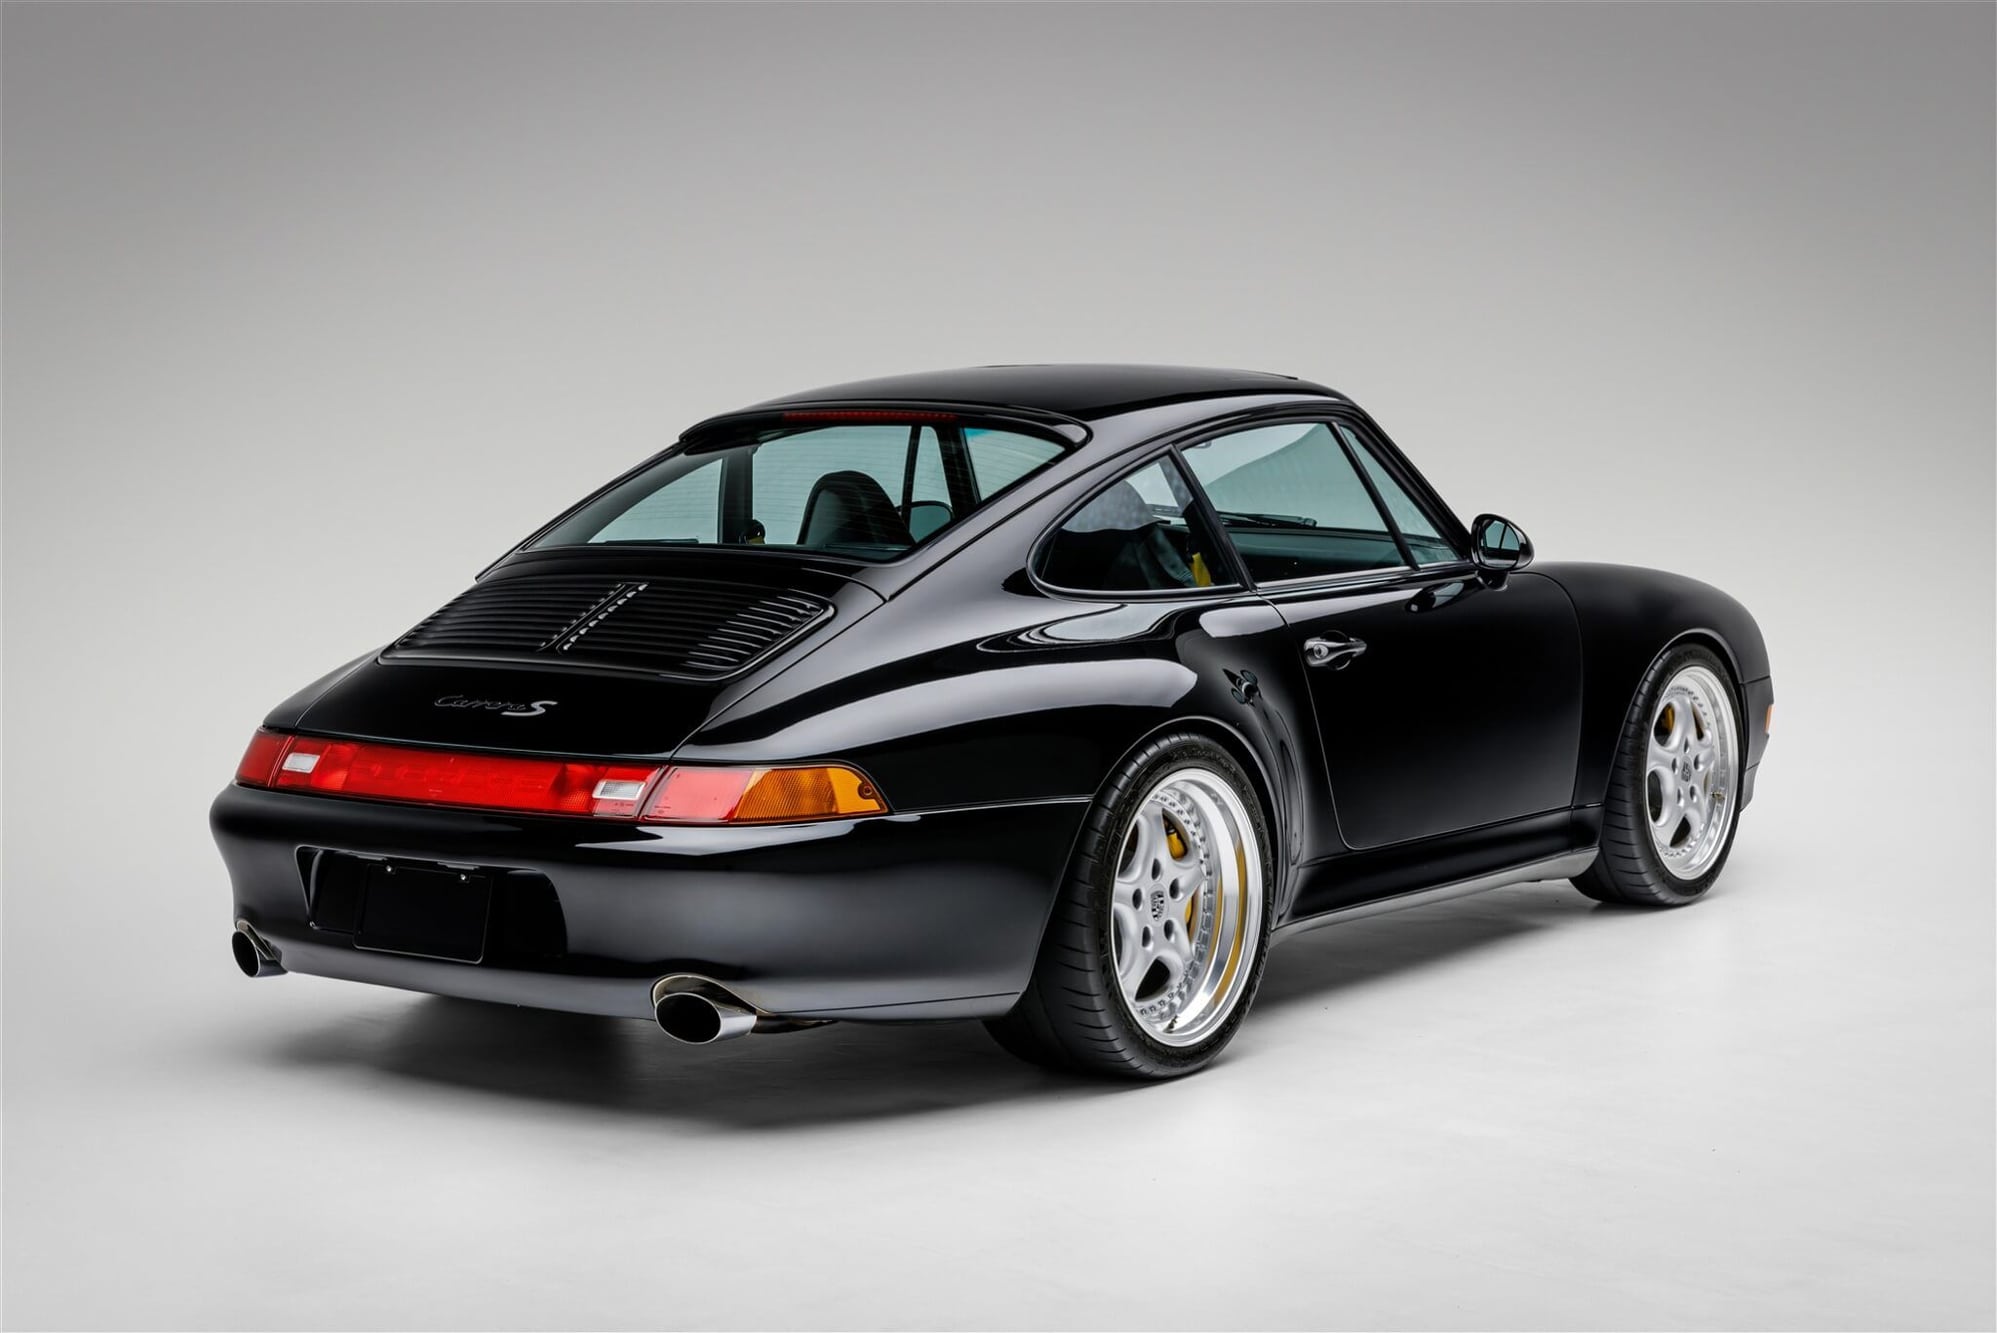 1997 Porsche 911 - 1997 Porsche 993 C2S 4.0L Rothsport Rstrada Build - Used - VIN WP0AA2991VS322611 - 71,000 Miles - 6 cyl - 2WD - Manual - Coupe - Black - Twinsburg, OH 44087, United States